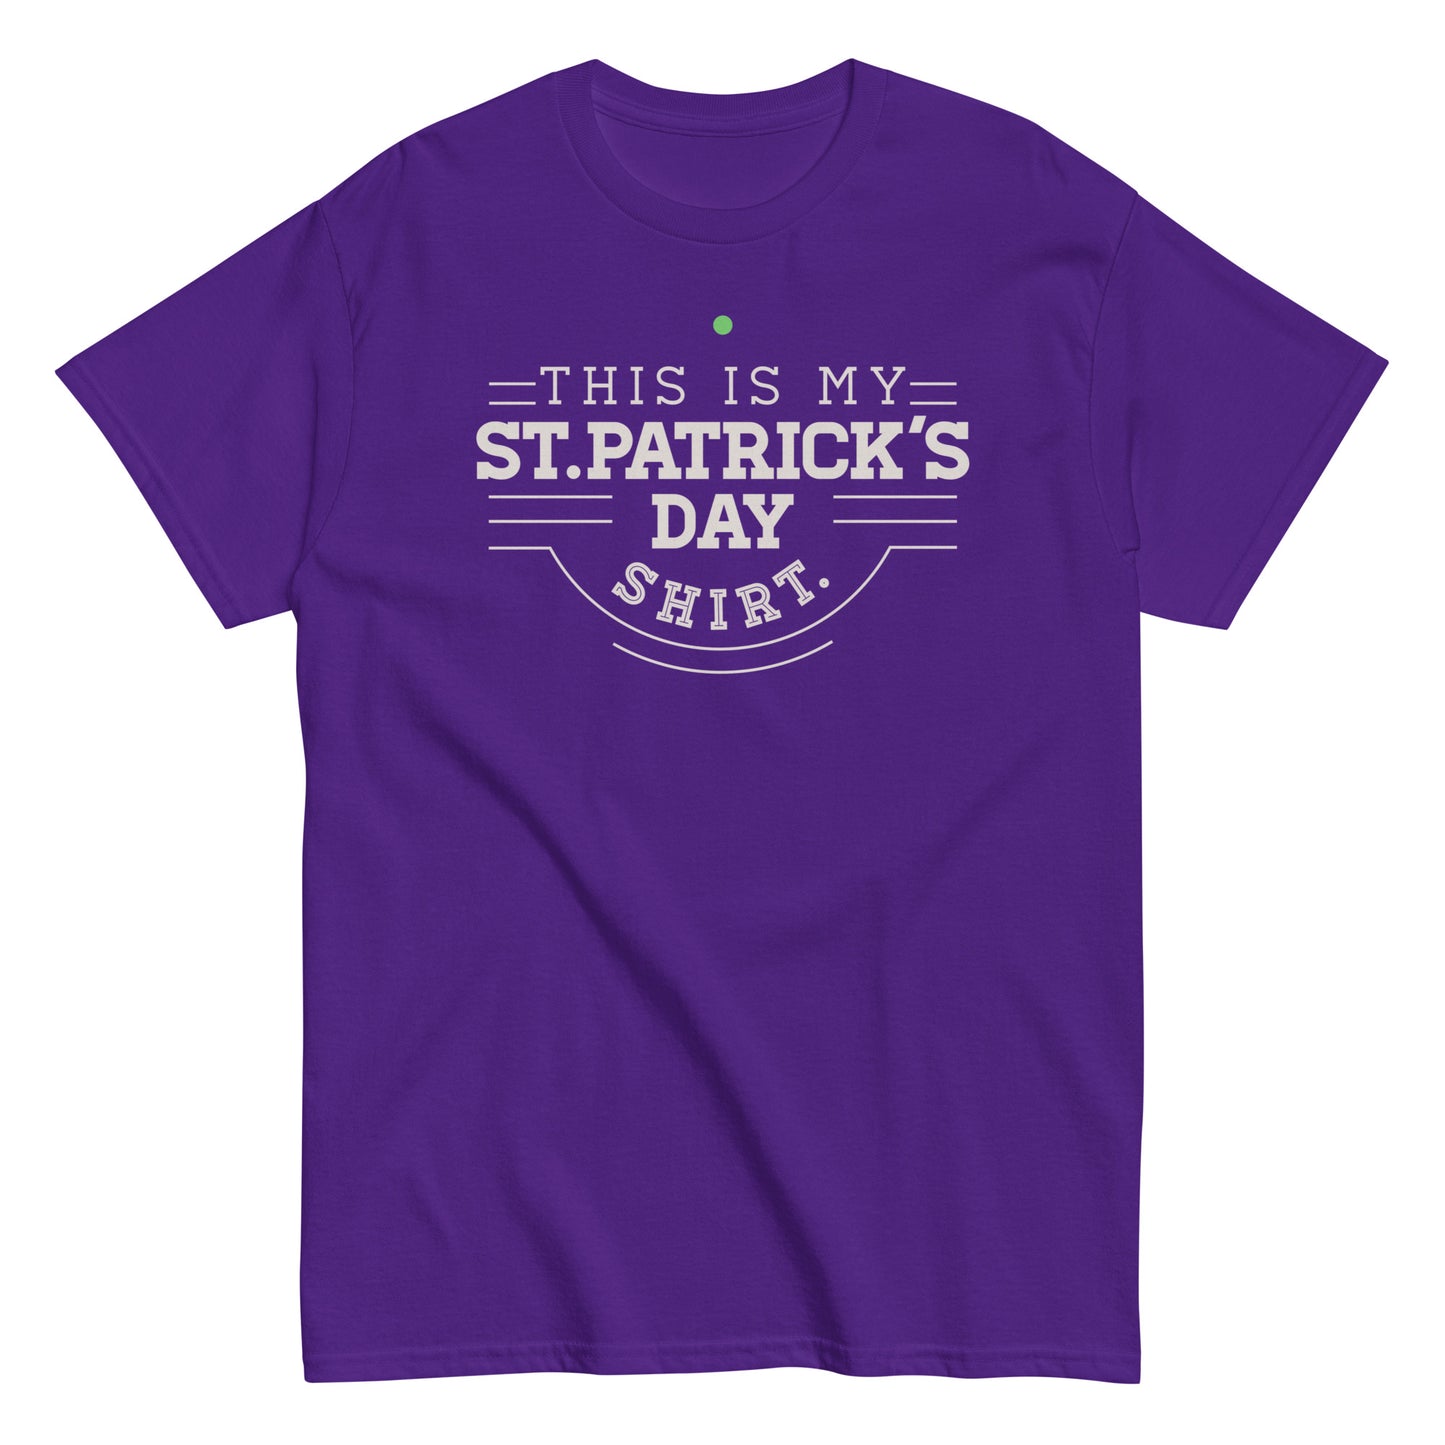 This Is My St. Patrick's Day Shirt Men's Classic Tee